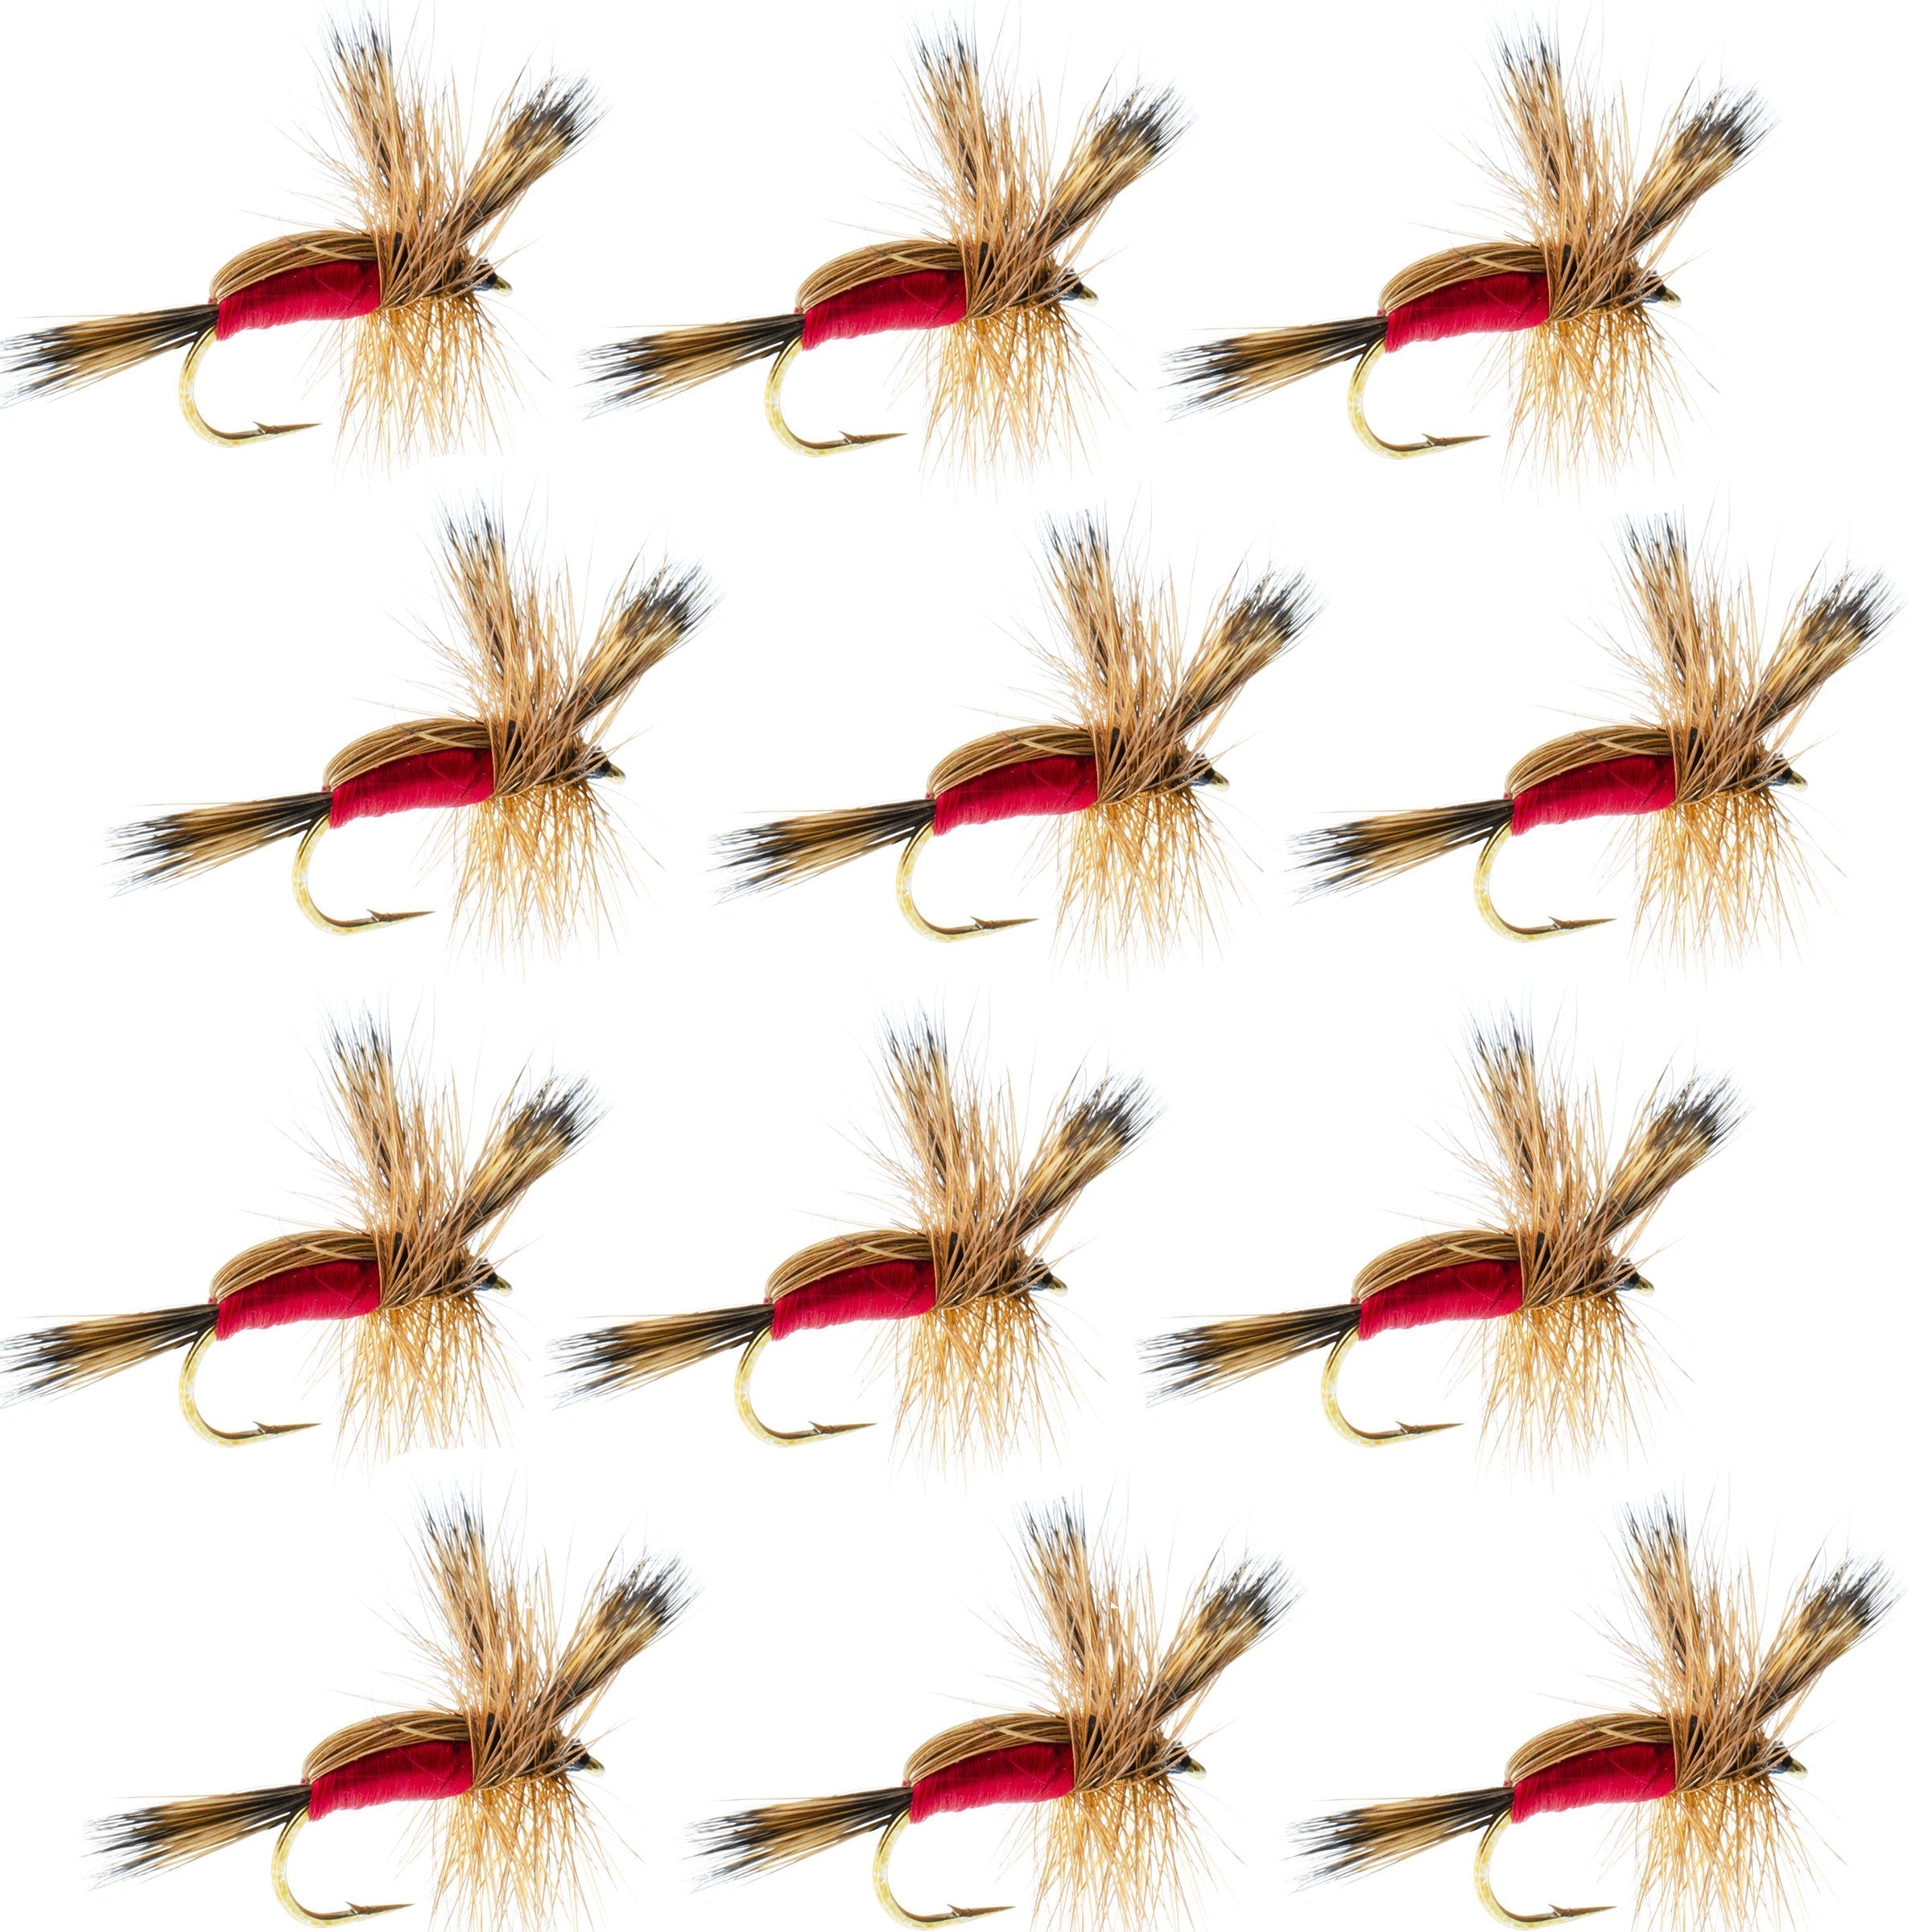 Red Humpy Classic Hair Wing Dry Fly - 1 Dozen Flies Hook Size 14